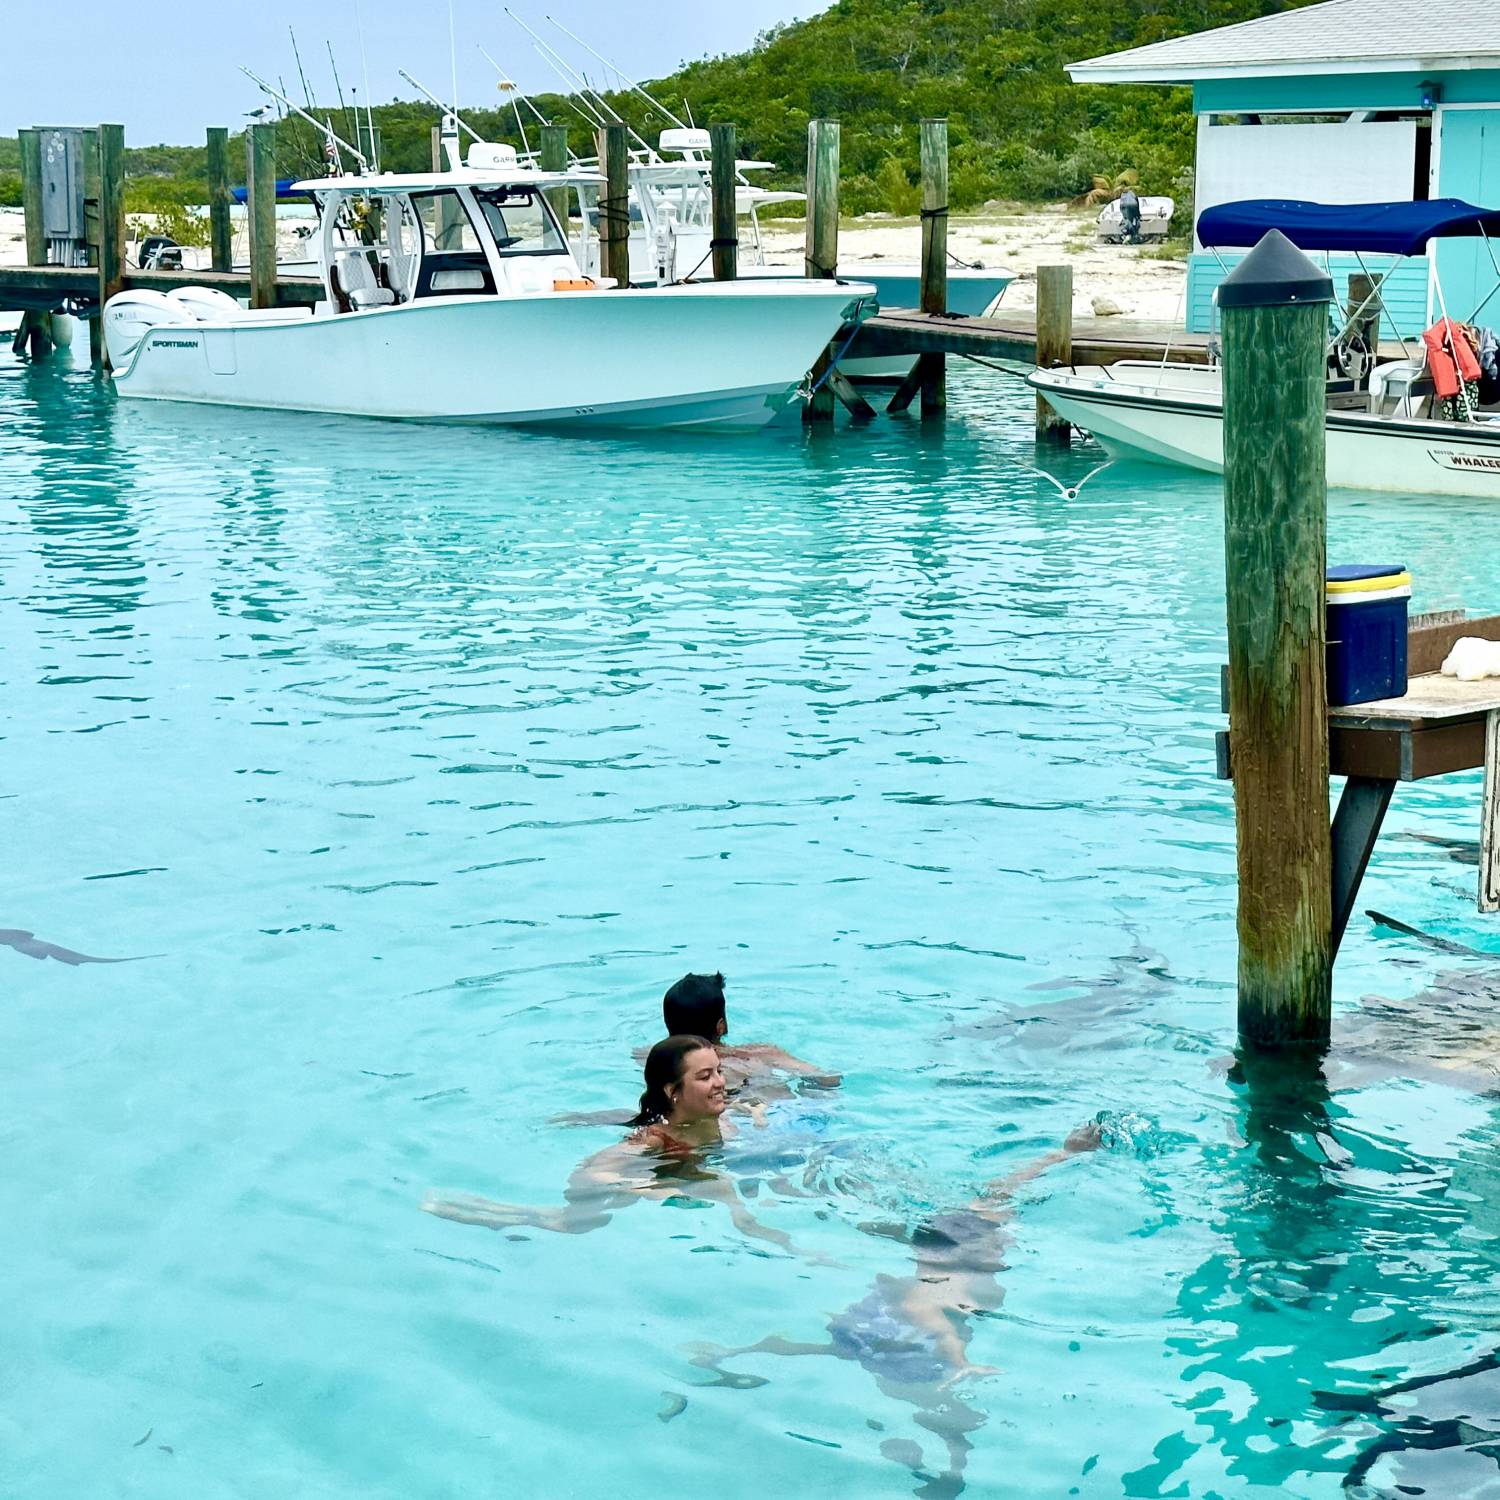 Swimming with the sharks at Compass cay Marina